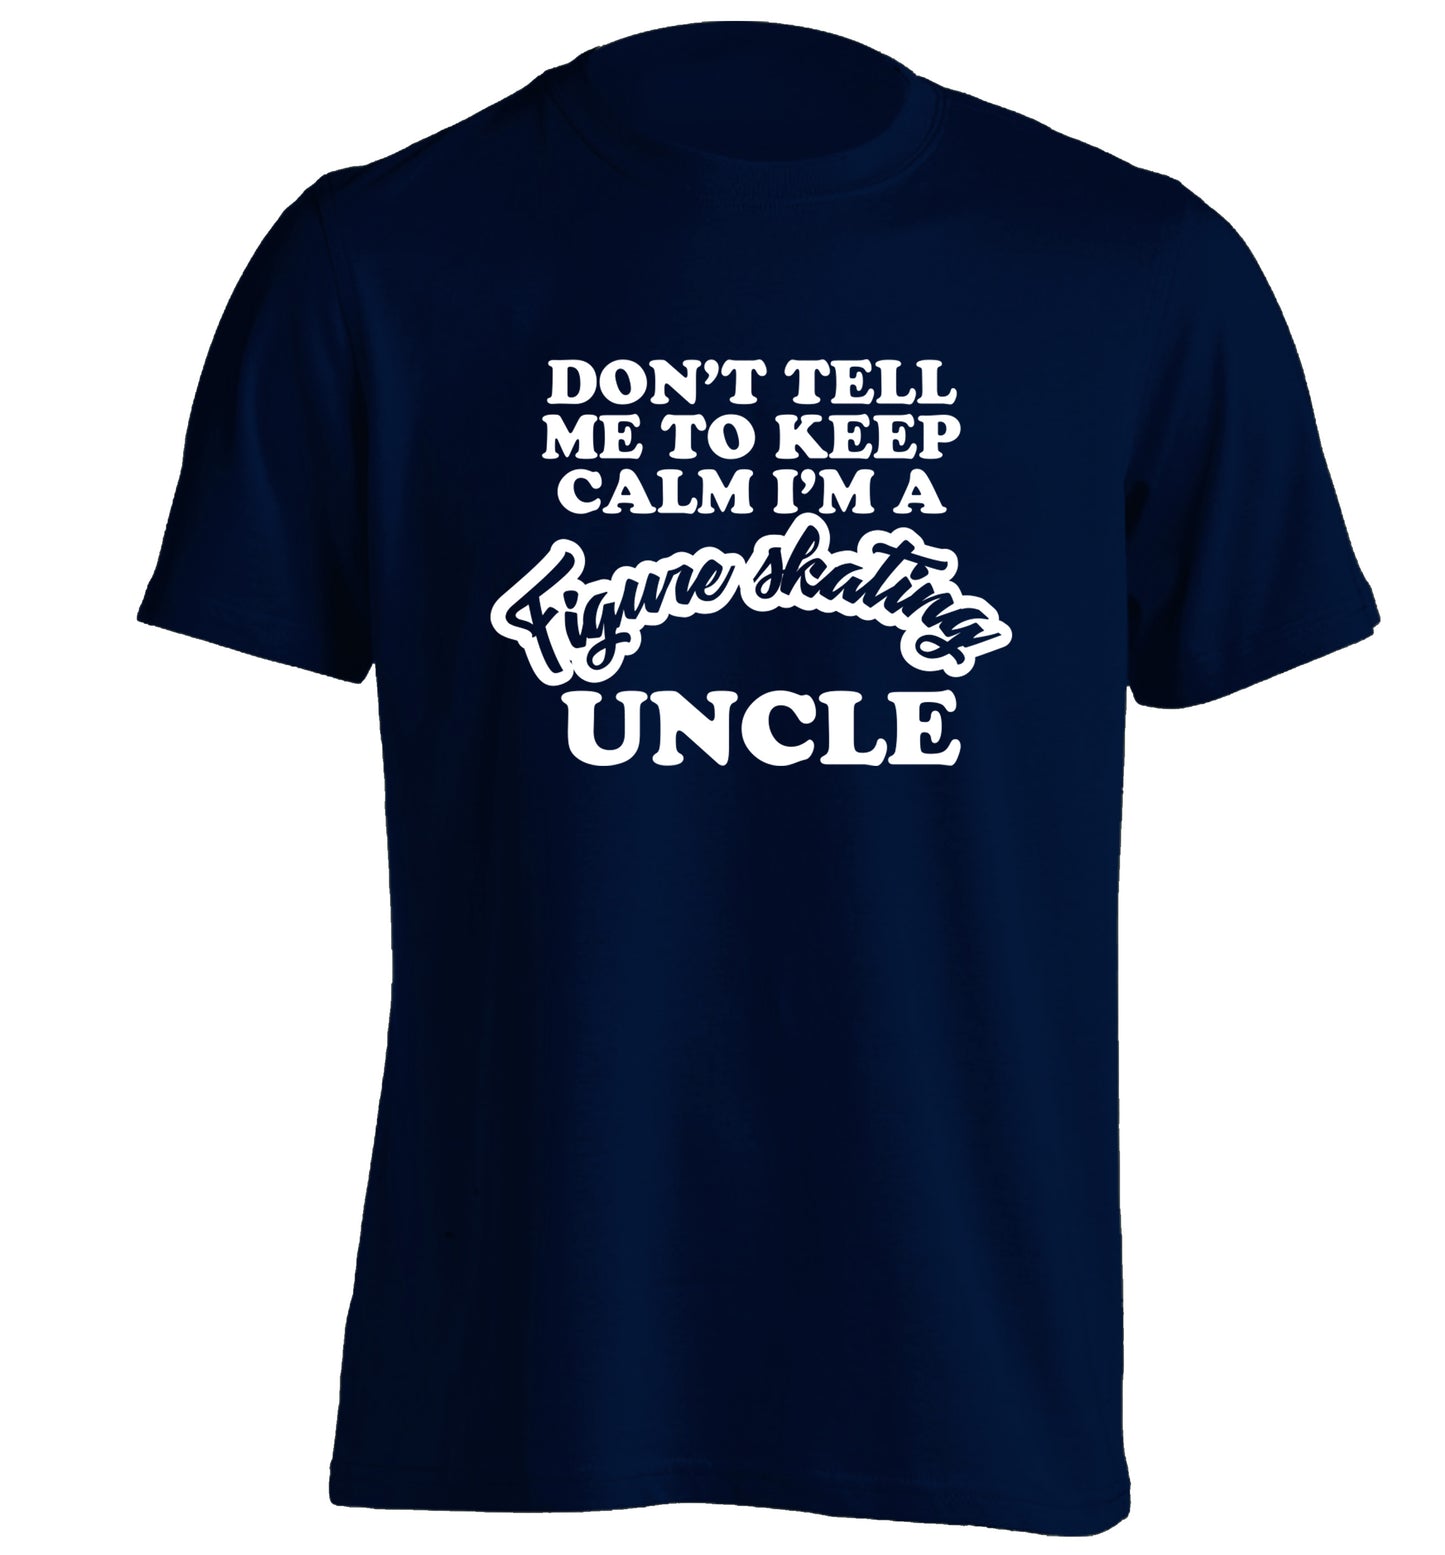 Don't tell me to keep calm I'm a figure skating uncle adults unisexnavy Tshirt 2XL